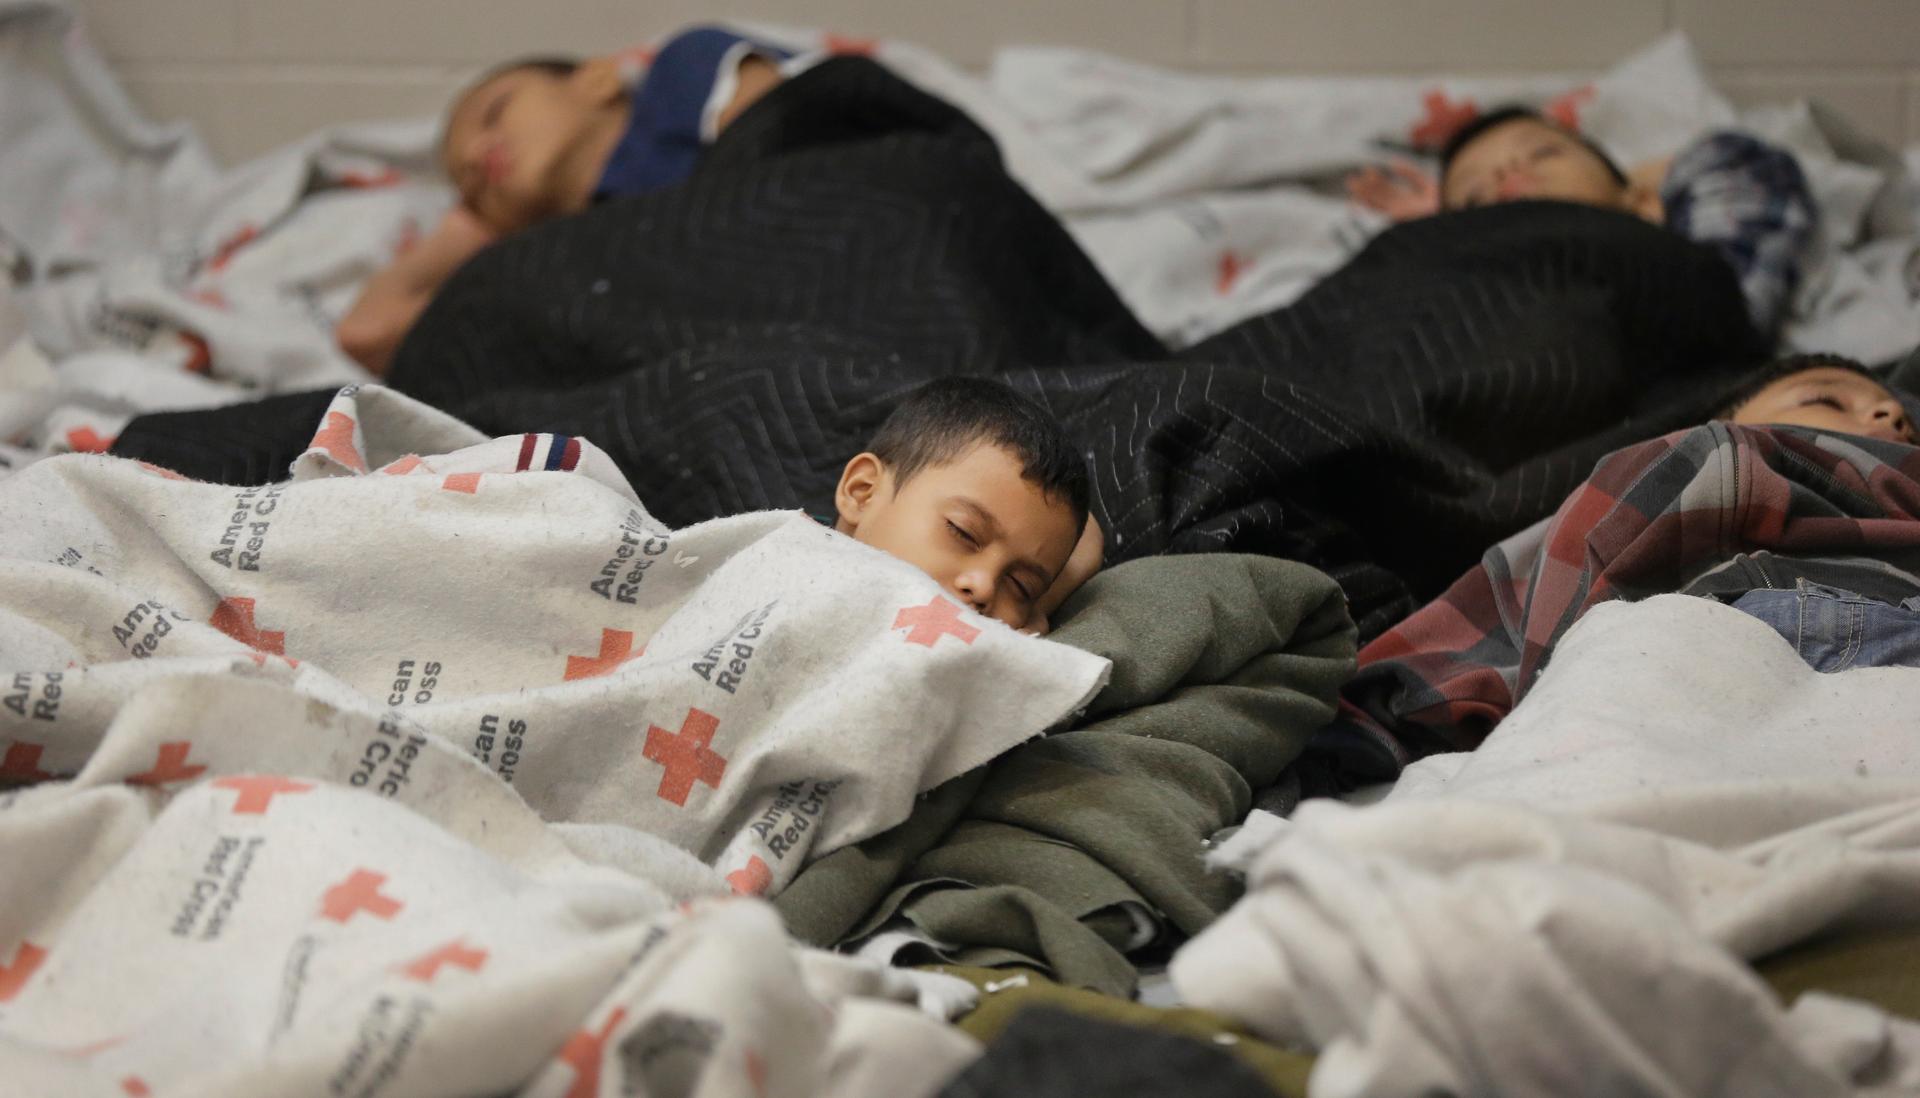 Detainees sleep in a holding cell at a US Customs and Border Protection processing facility, in Brownsville, Texas on June 18, 2014.